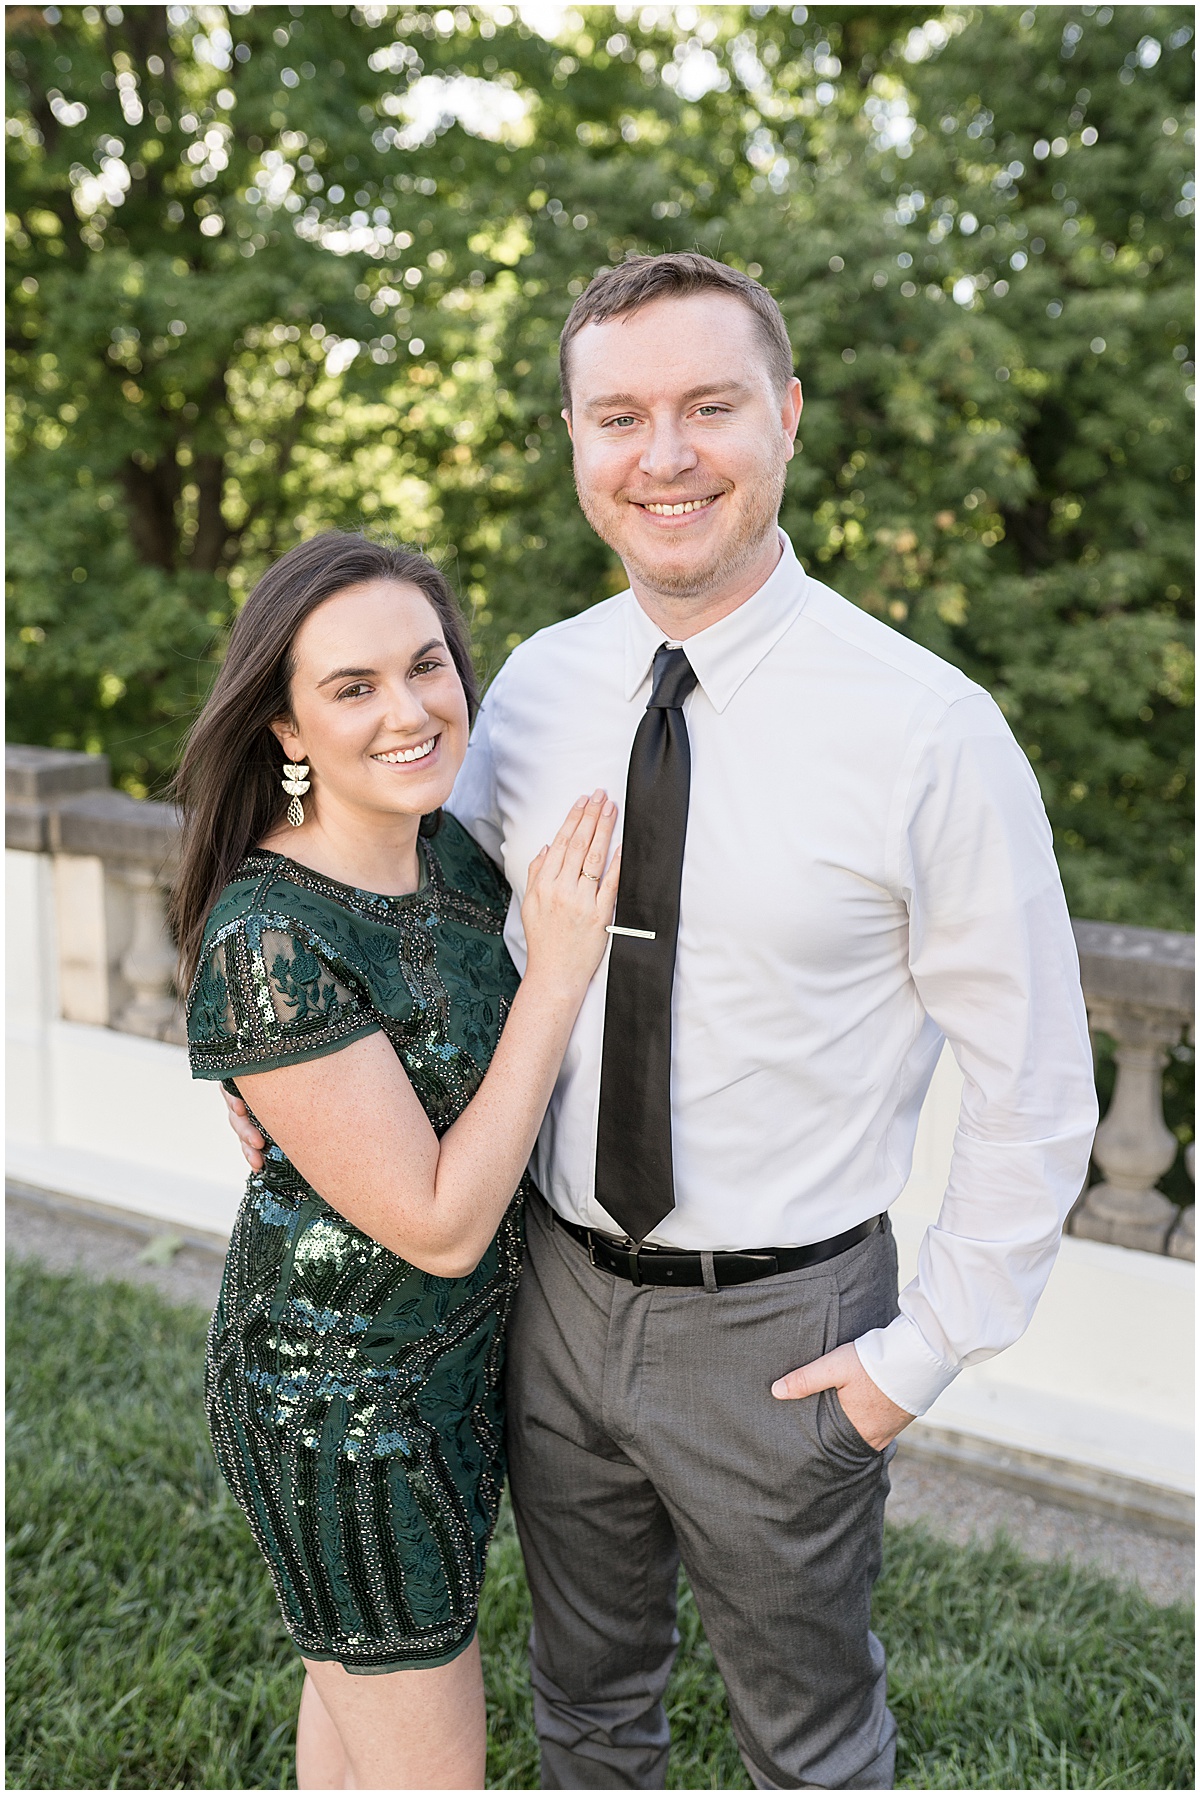 Bride to be wears green dress at jewel tone engagement photos at Newfields